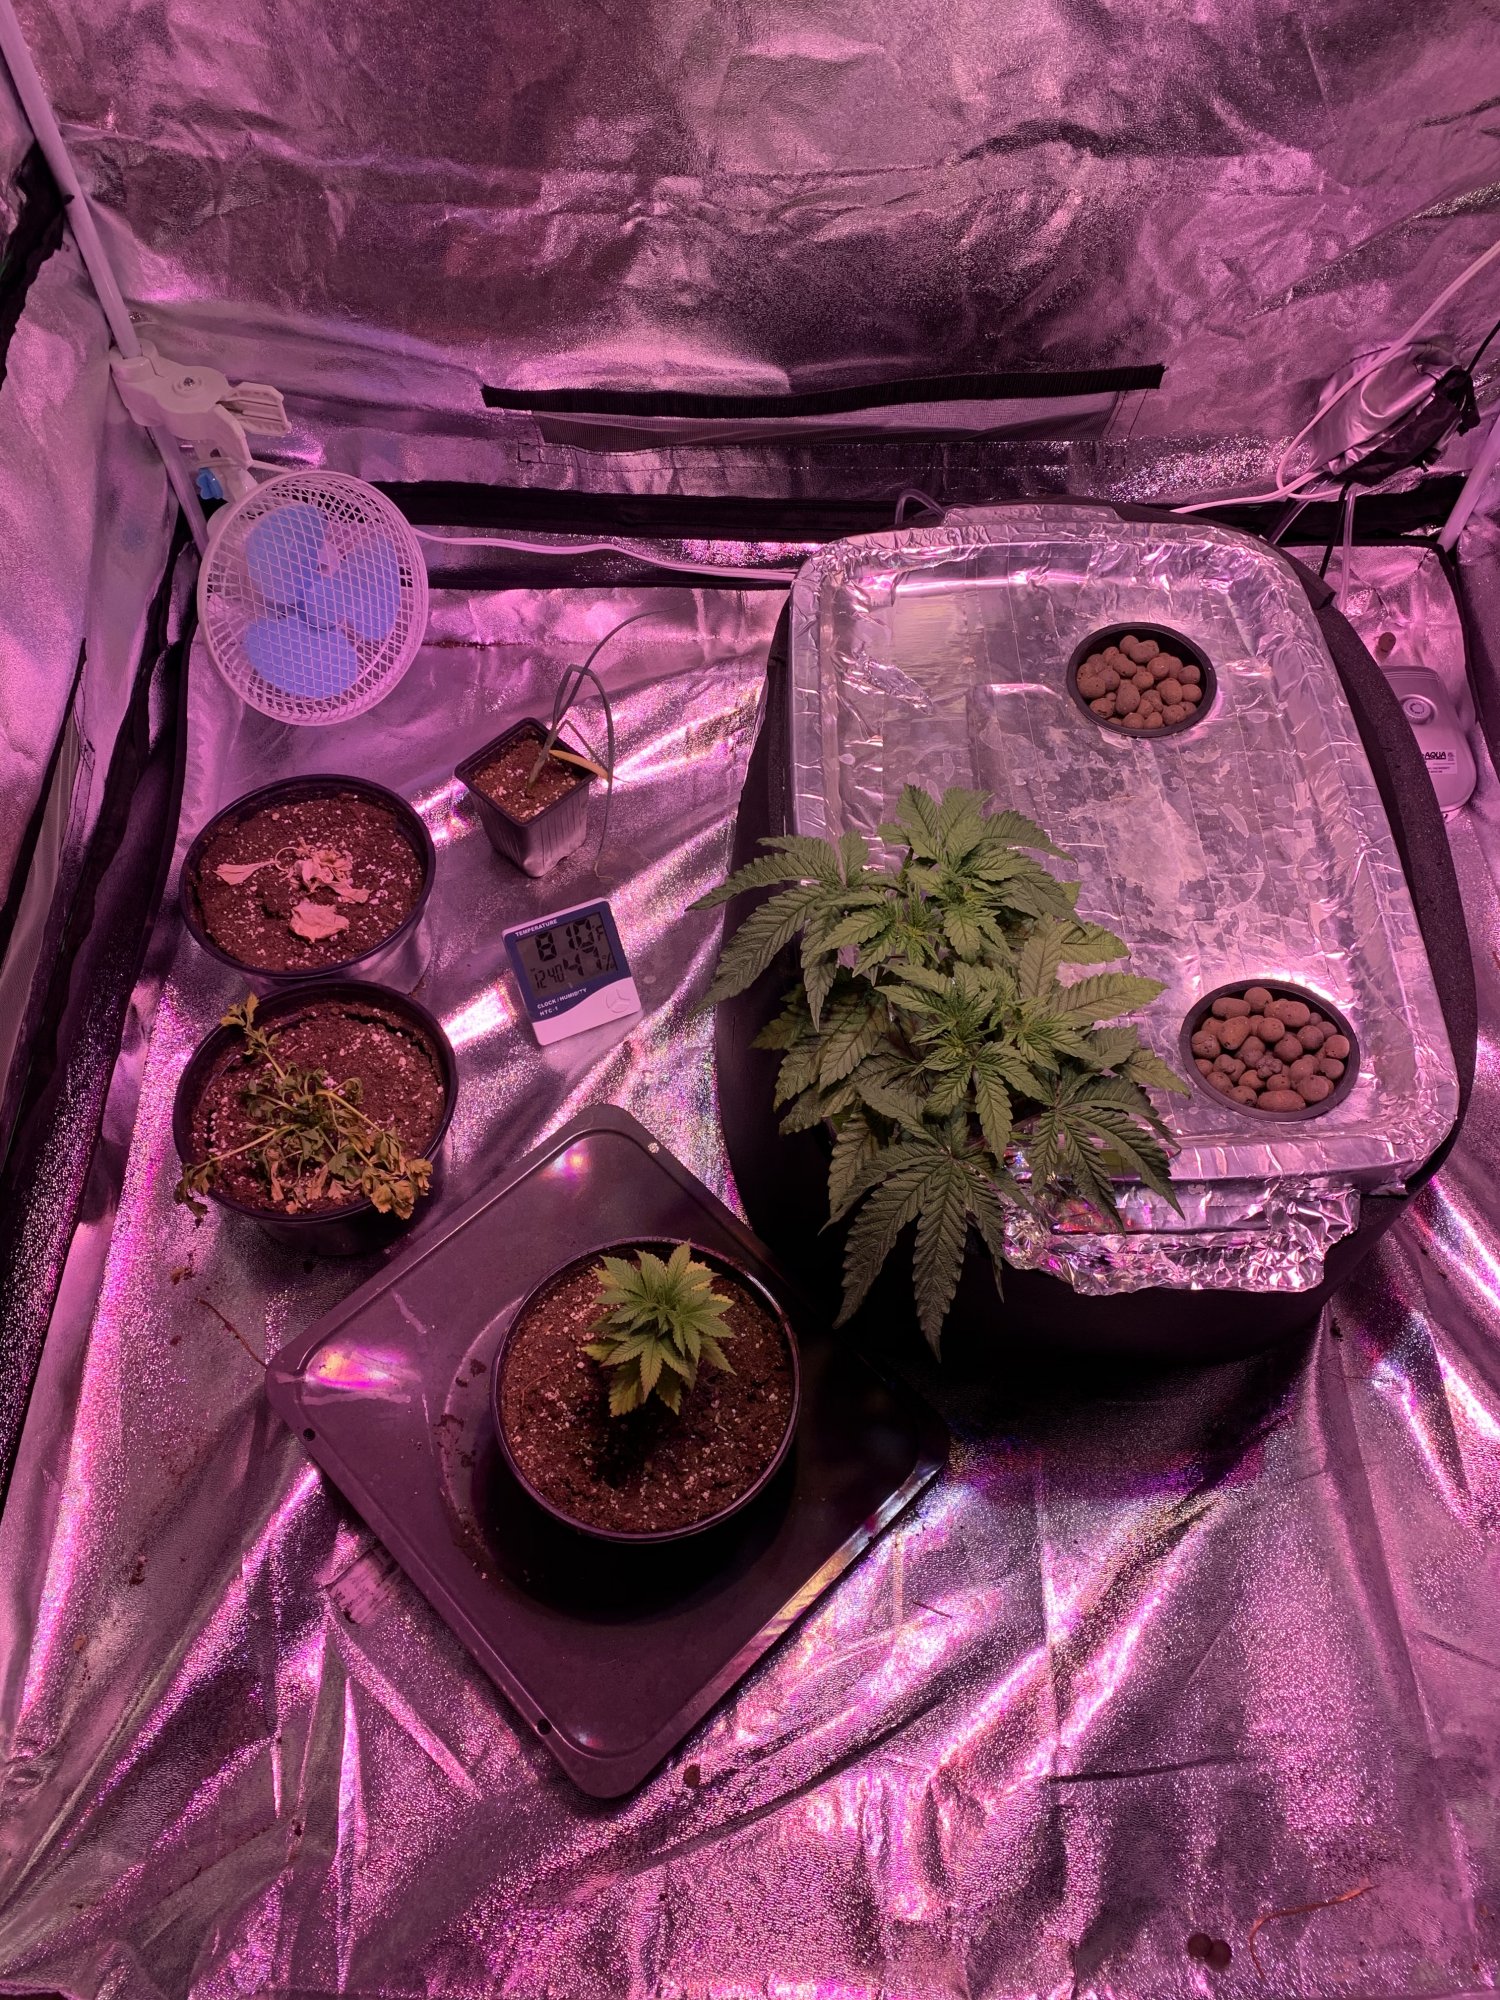 I need help for my second grow opinions wanted 2